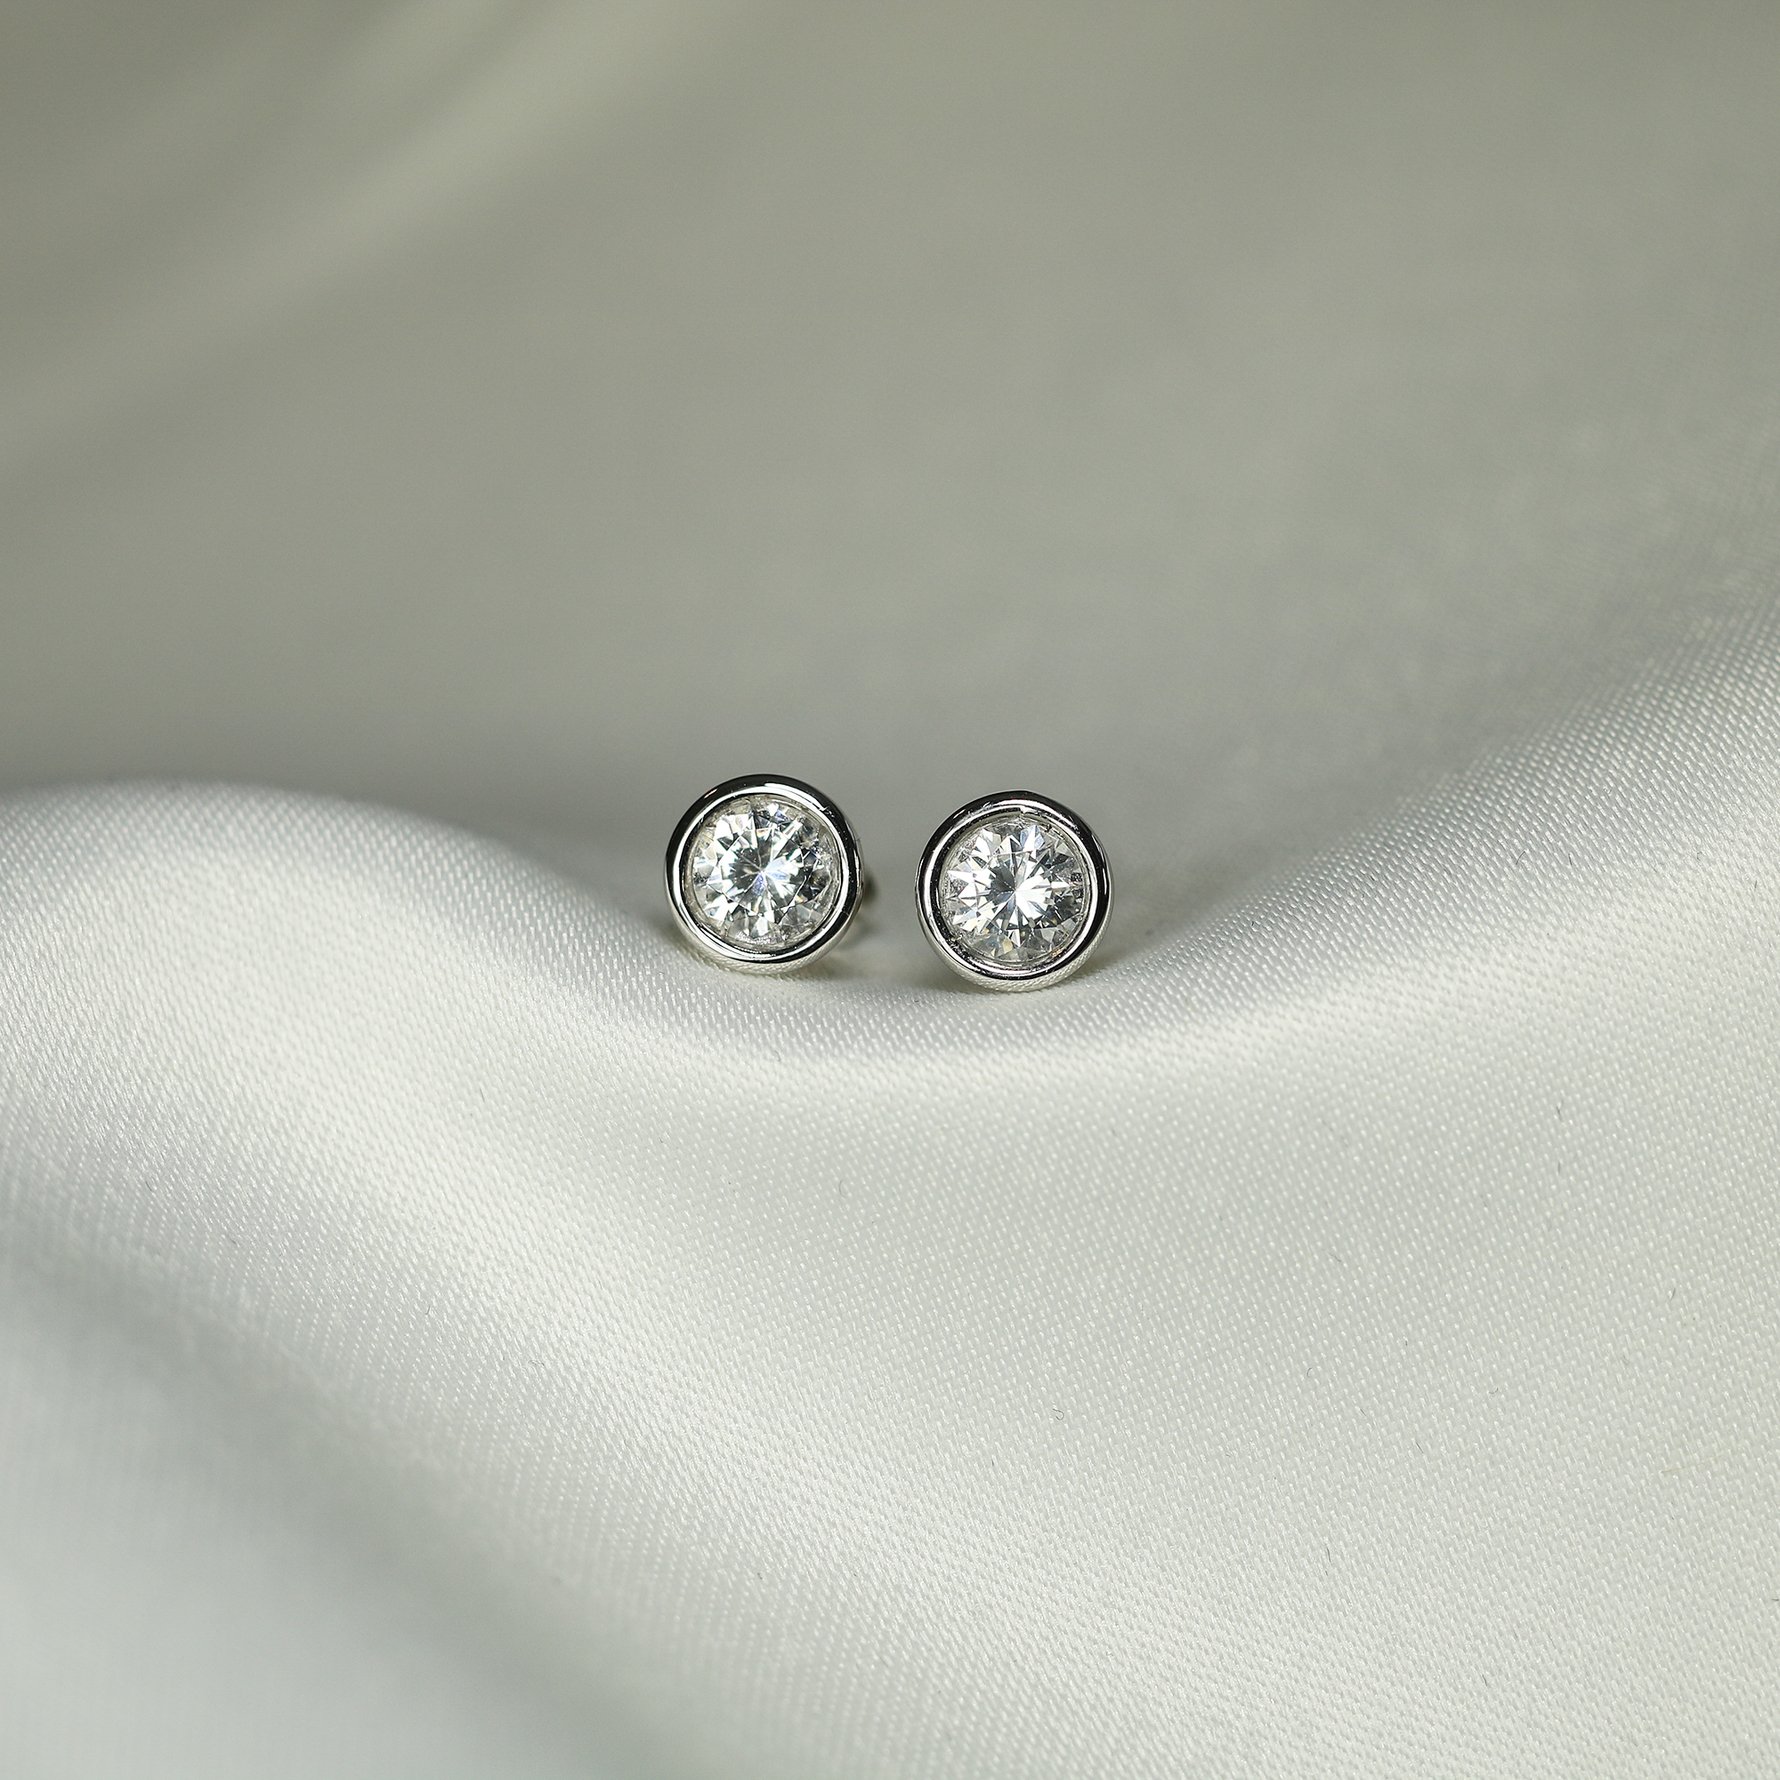 Diamond earrings and ear studs as a gift for your girlfriend